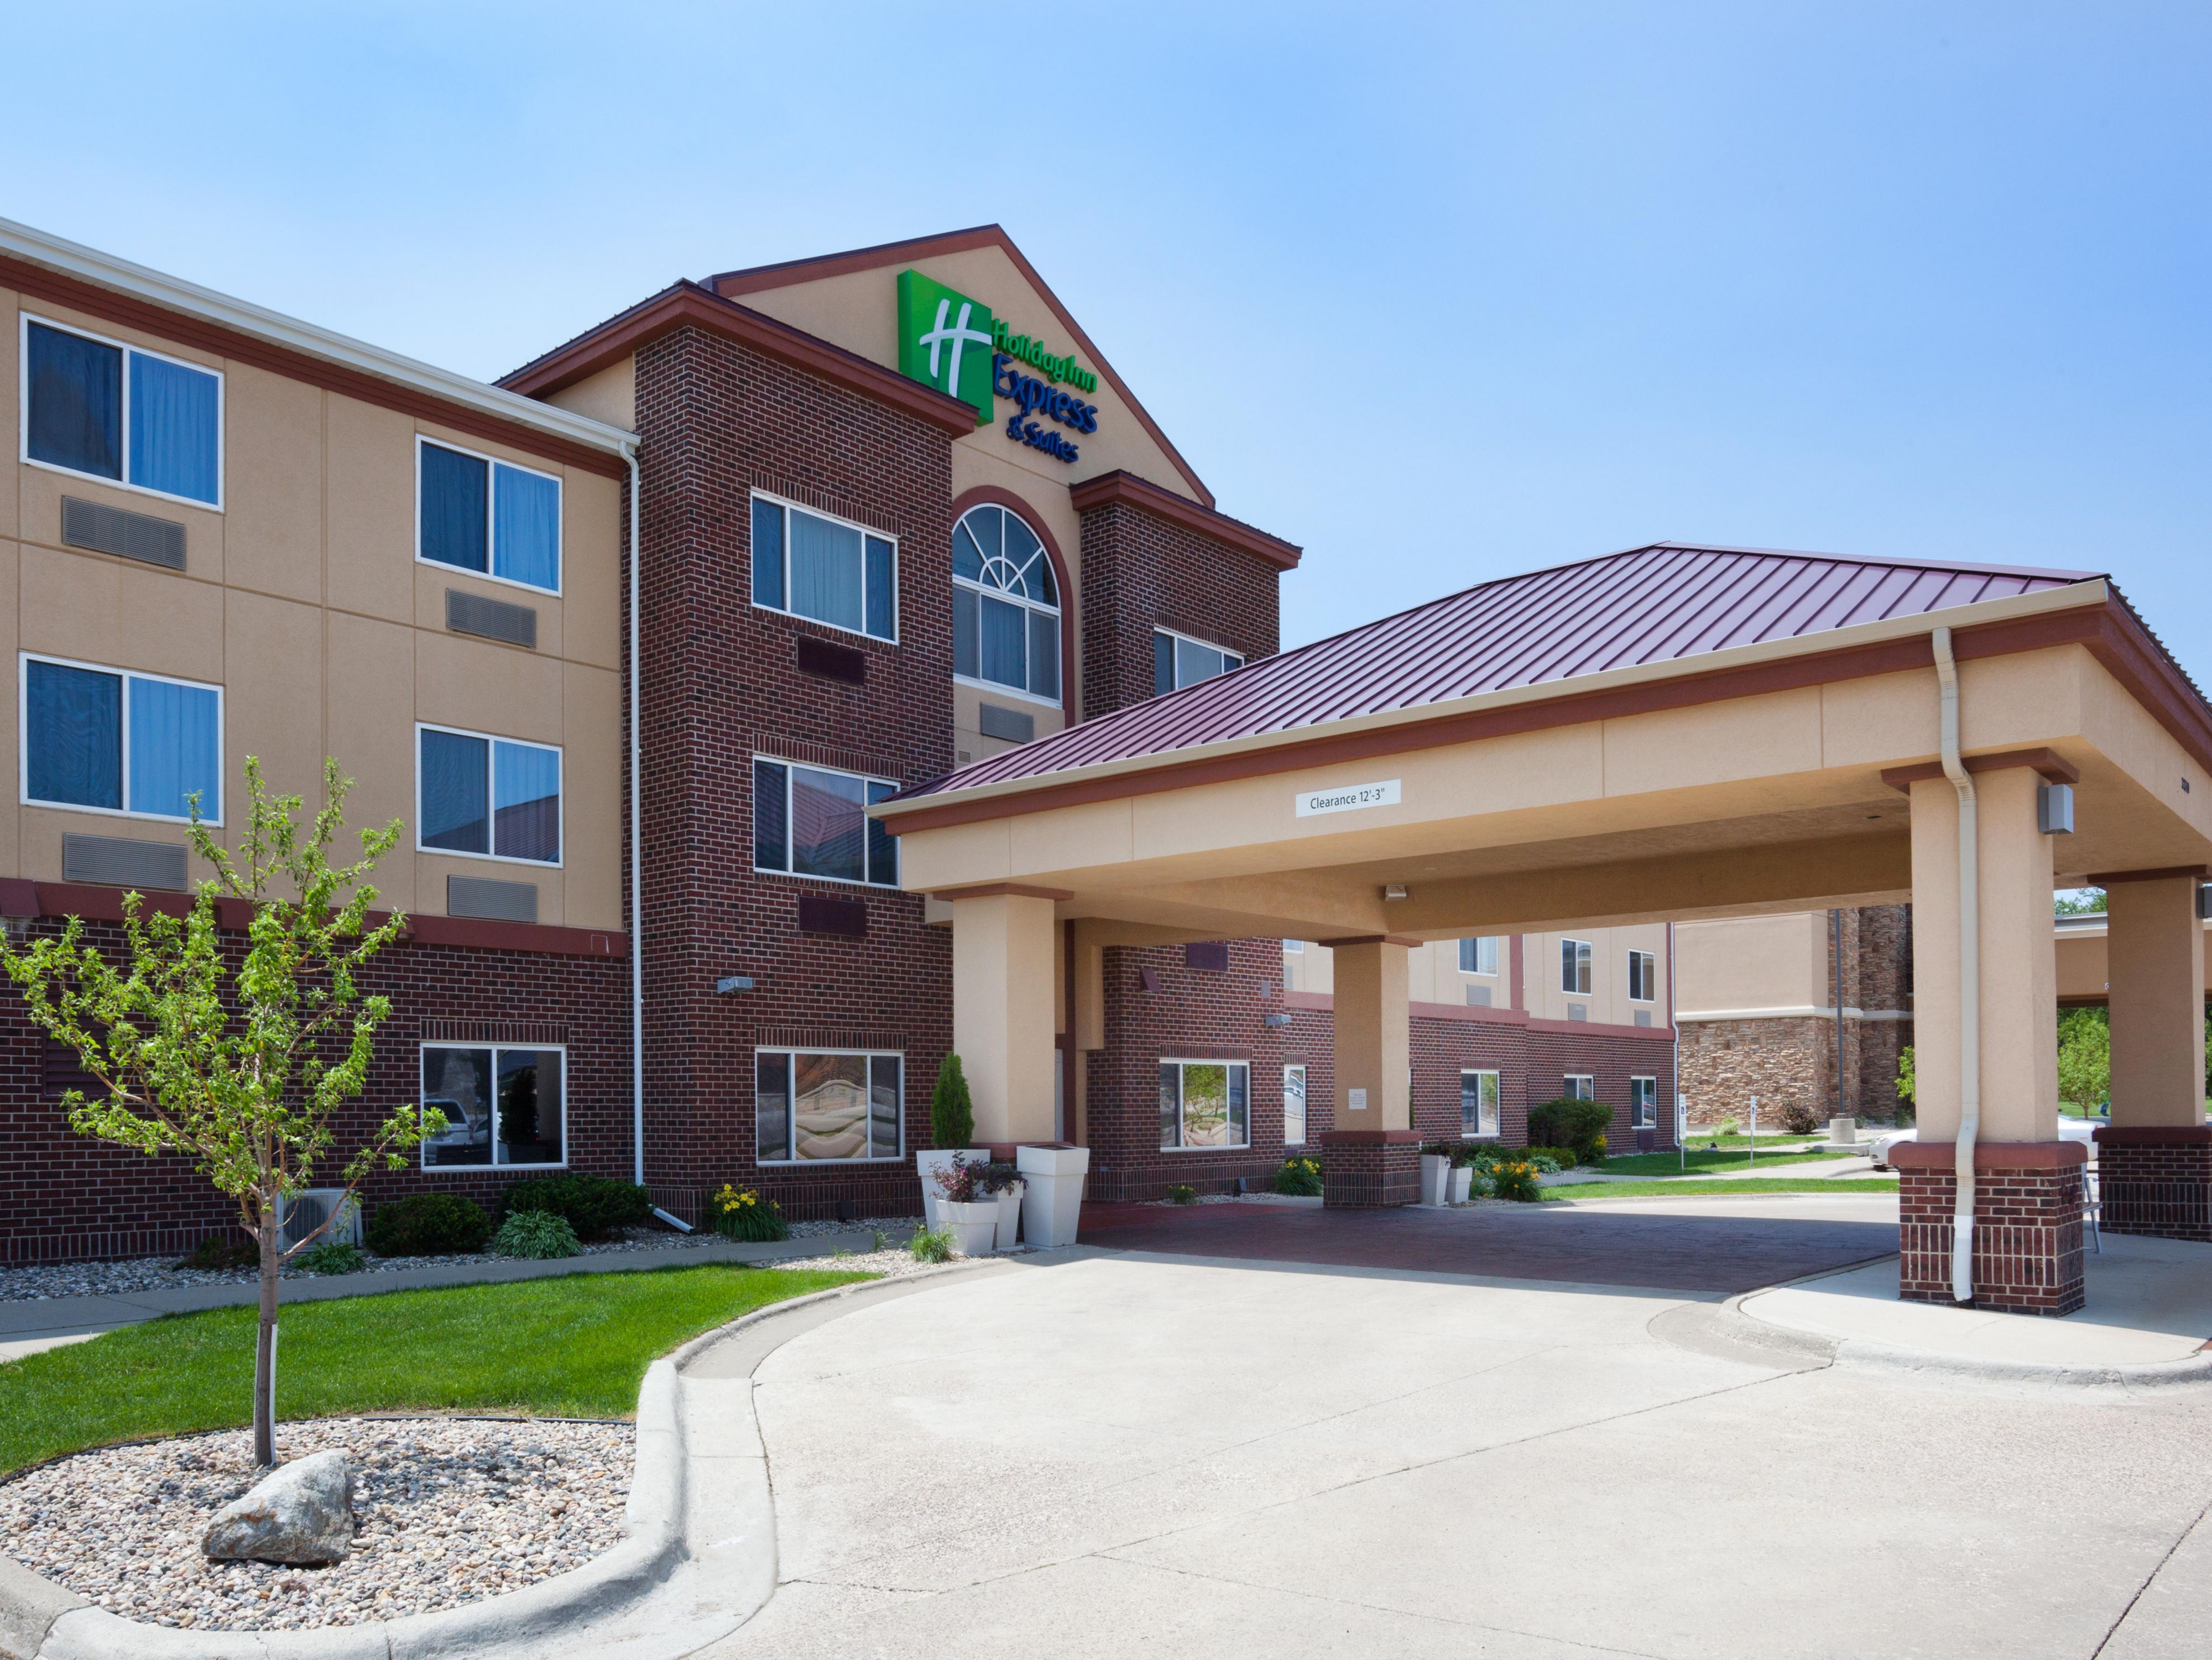 holiday inn express and suites aberdeen 4063682532 4x3